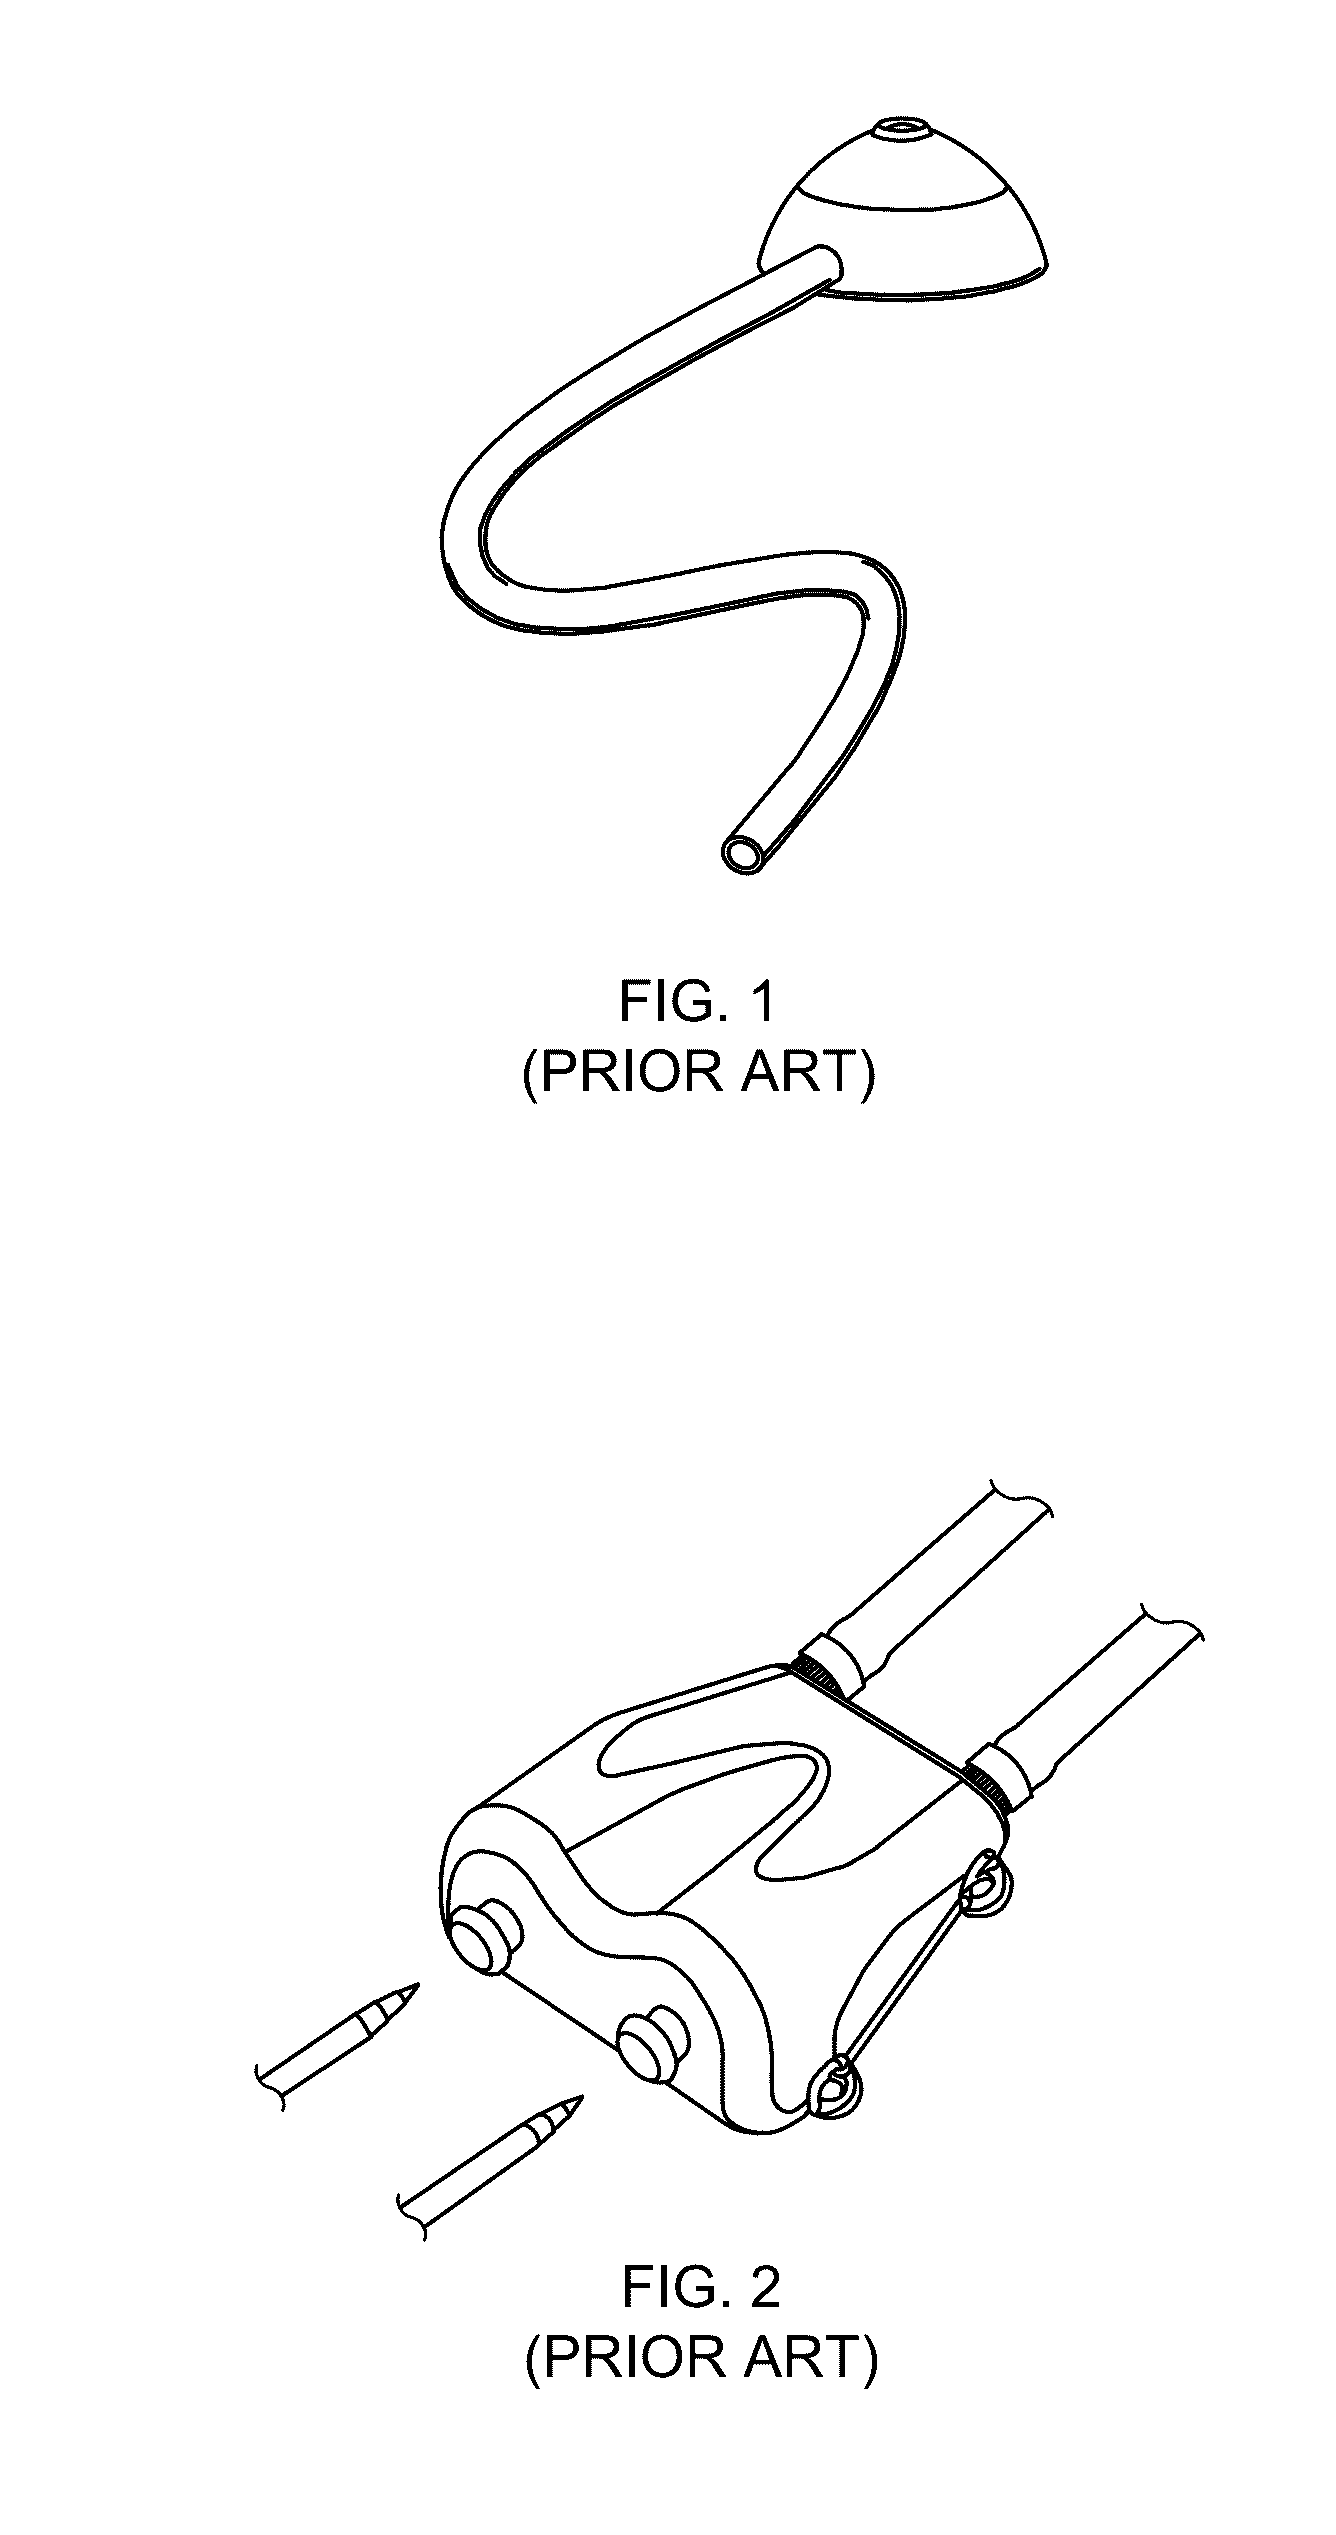 Graft-port hemodialysis systems, devices, and methods